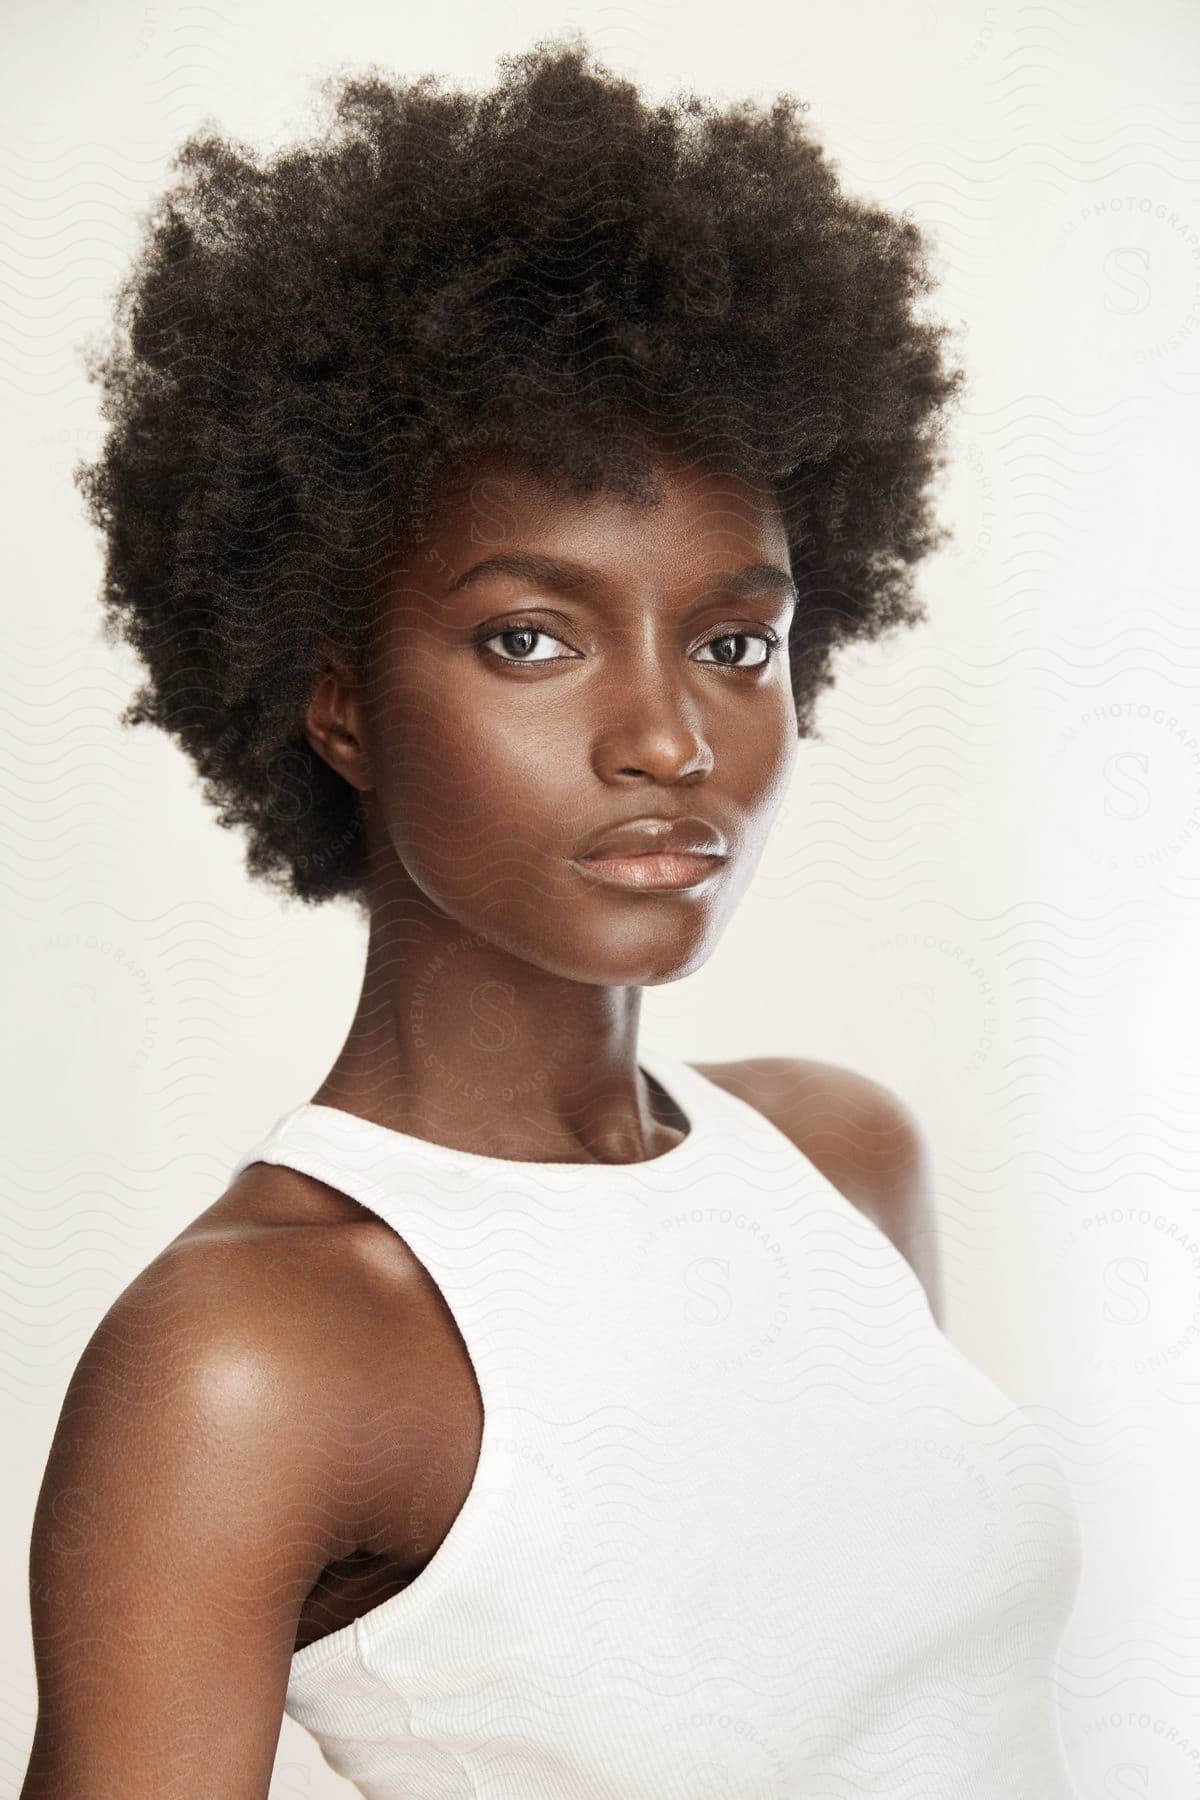 Young attractive woman with afro hairstyle